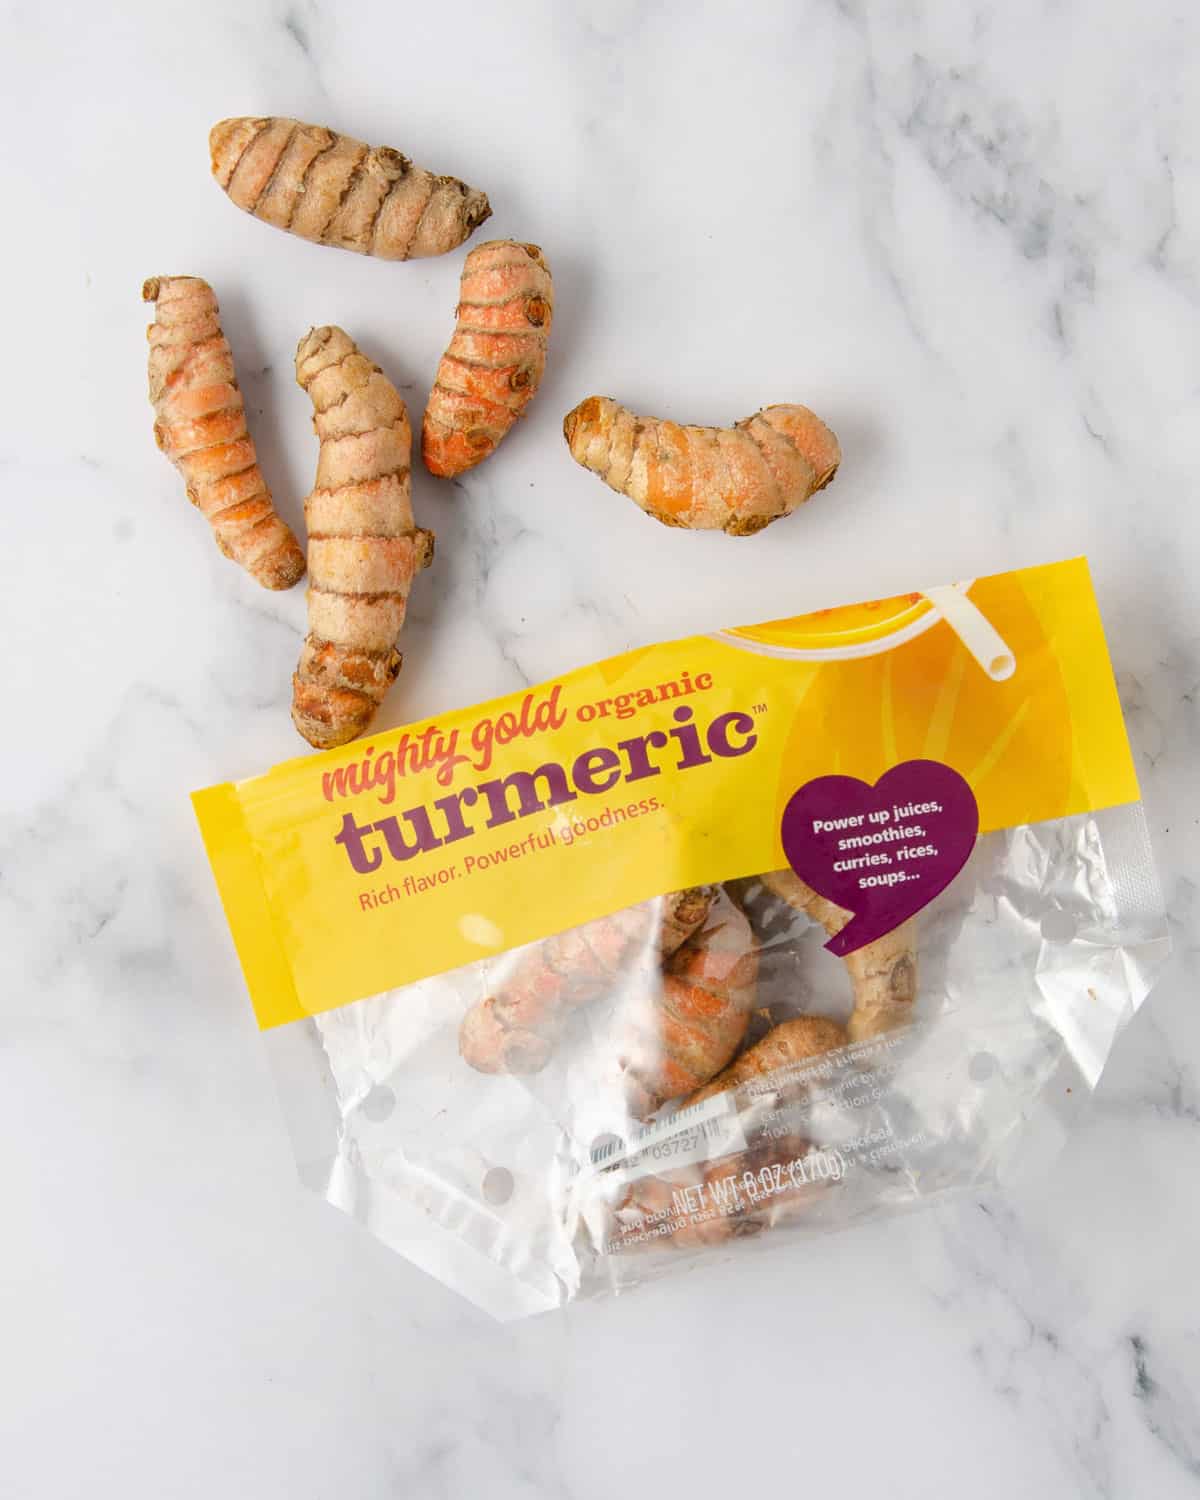 A bag of turmeric root on a marble countertop.